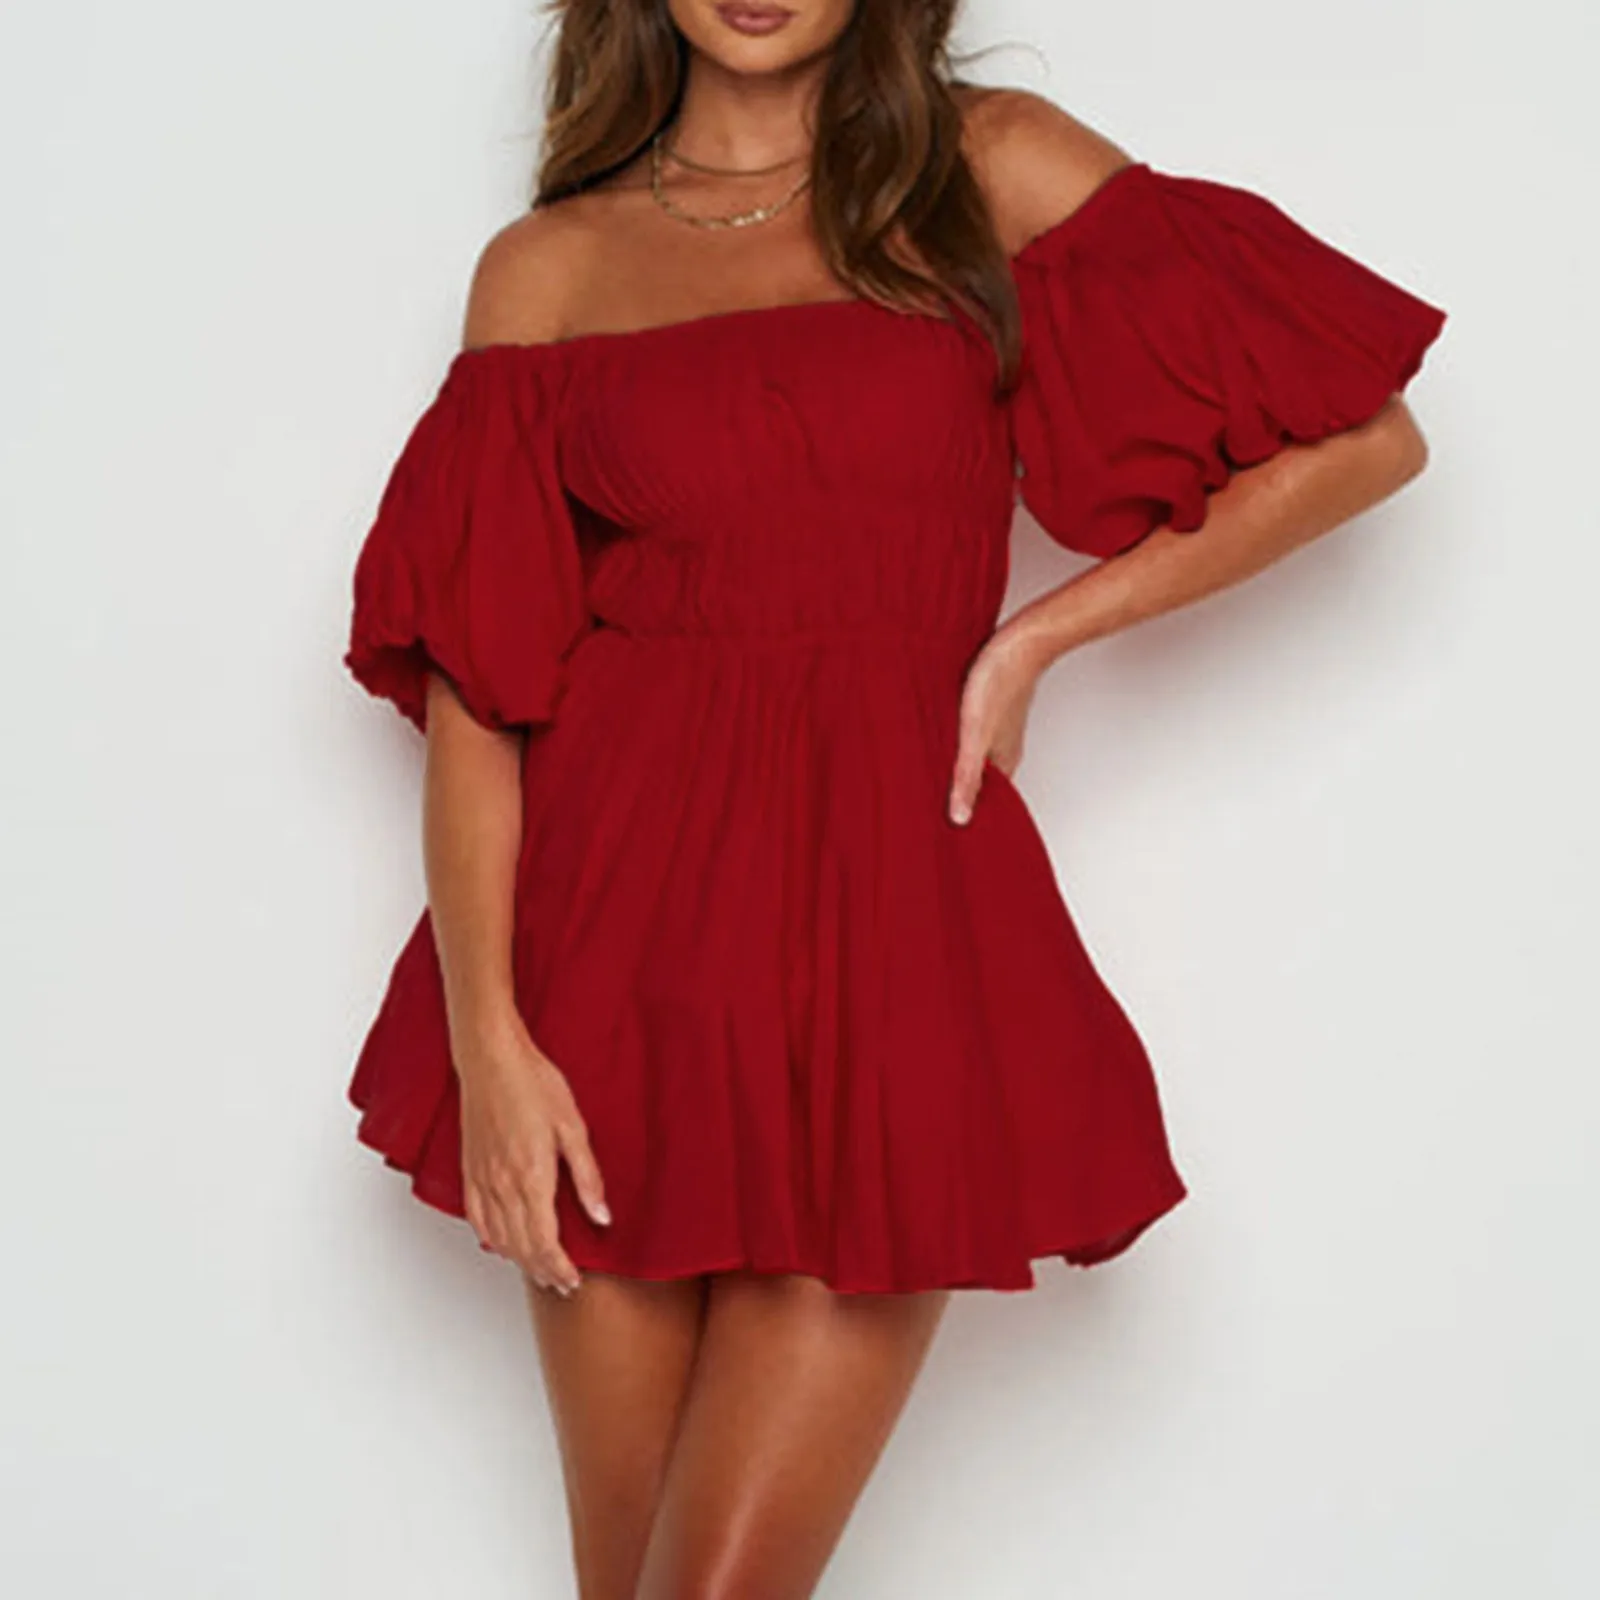 

Women Casual Summer Dress Solid Color A Line Ruffle Short Puff Sleeve Party Dresses Female Elegant Off-Shoulder Tunic Dress